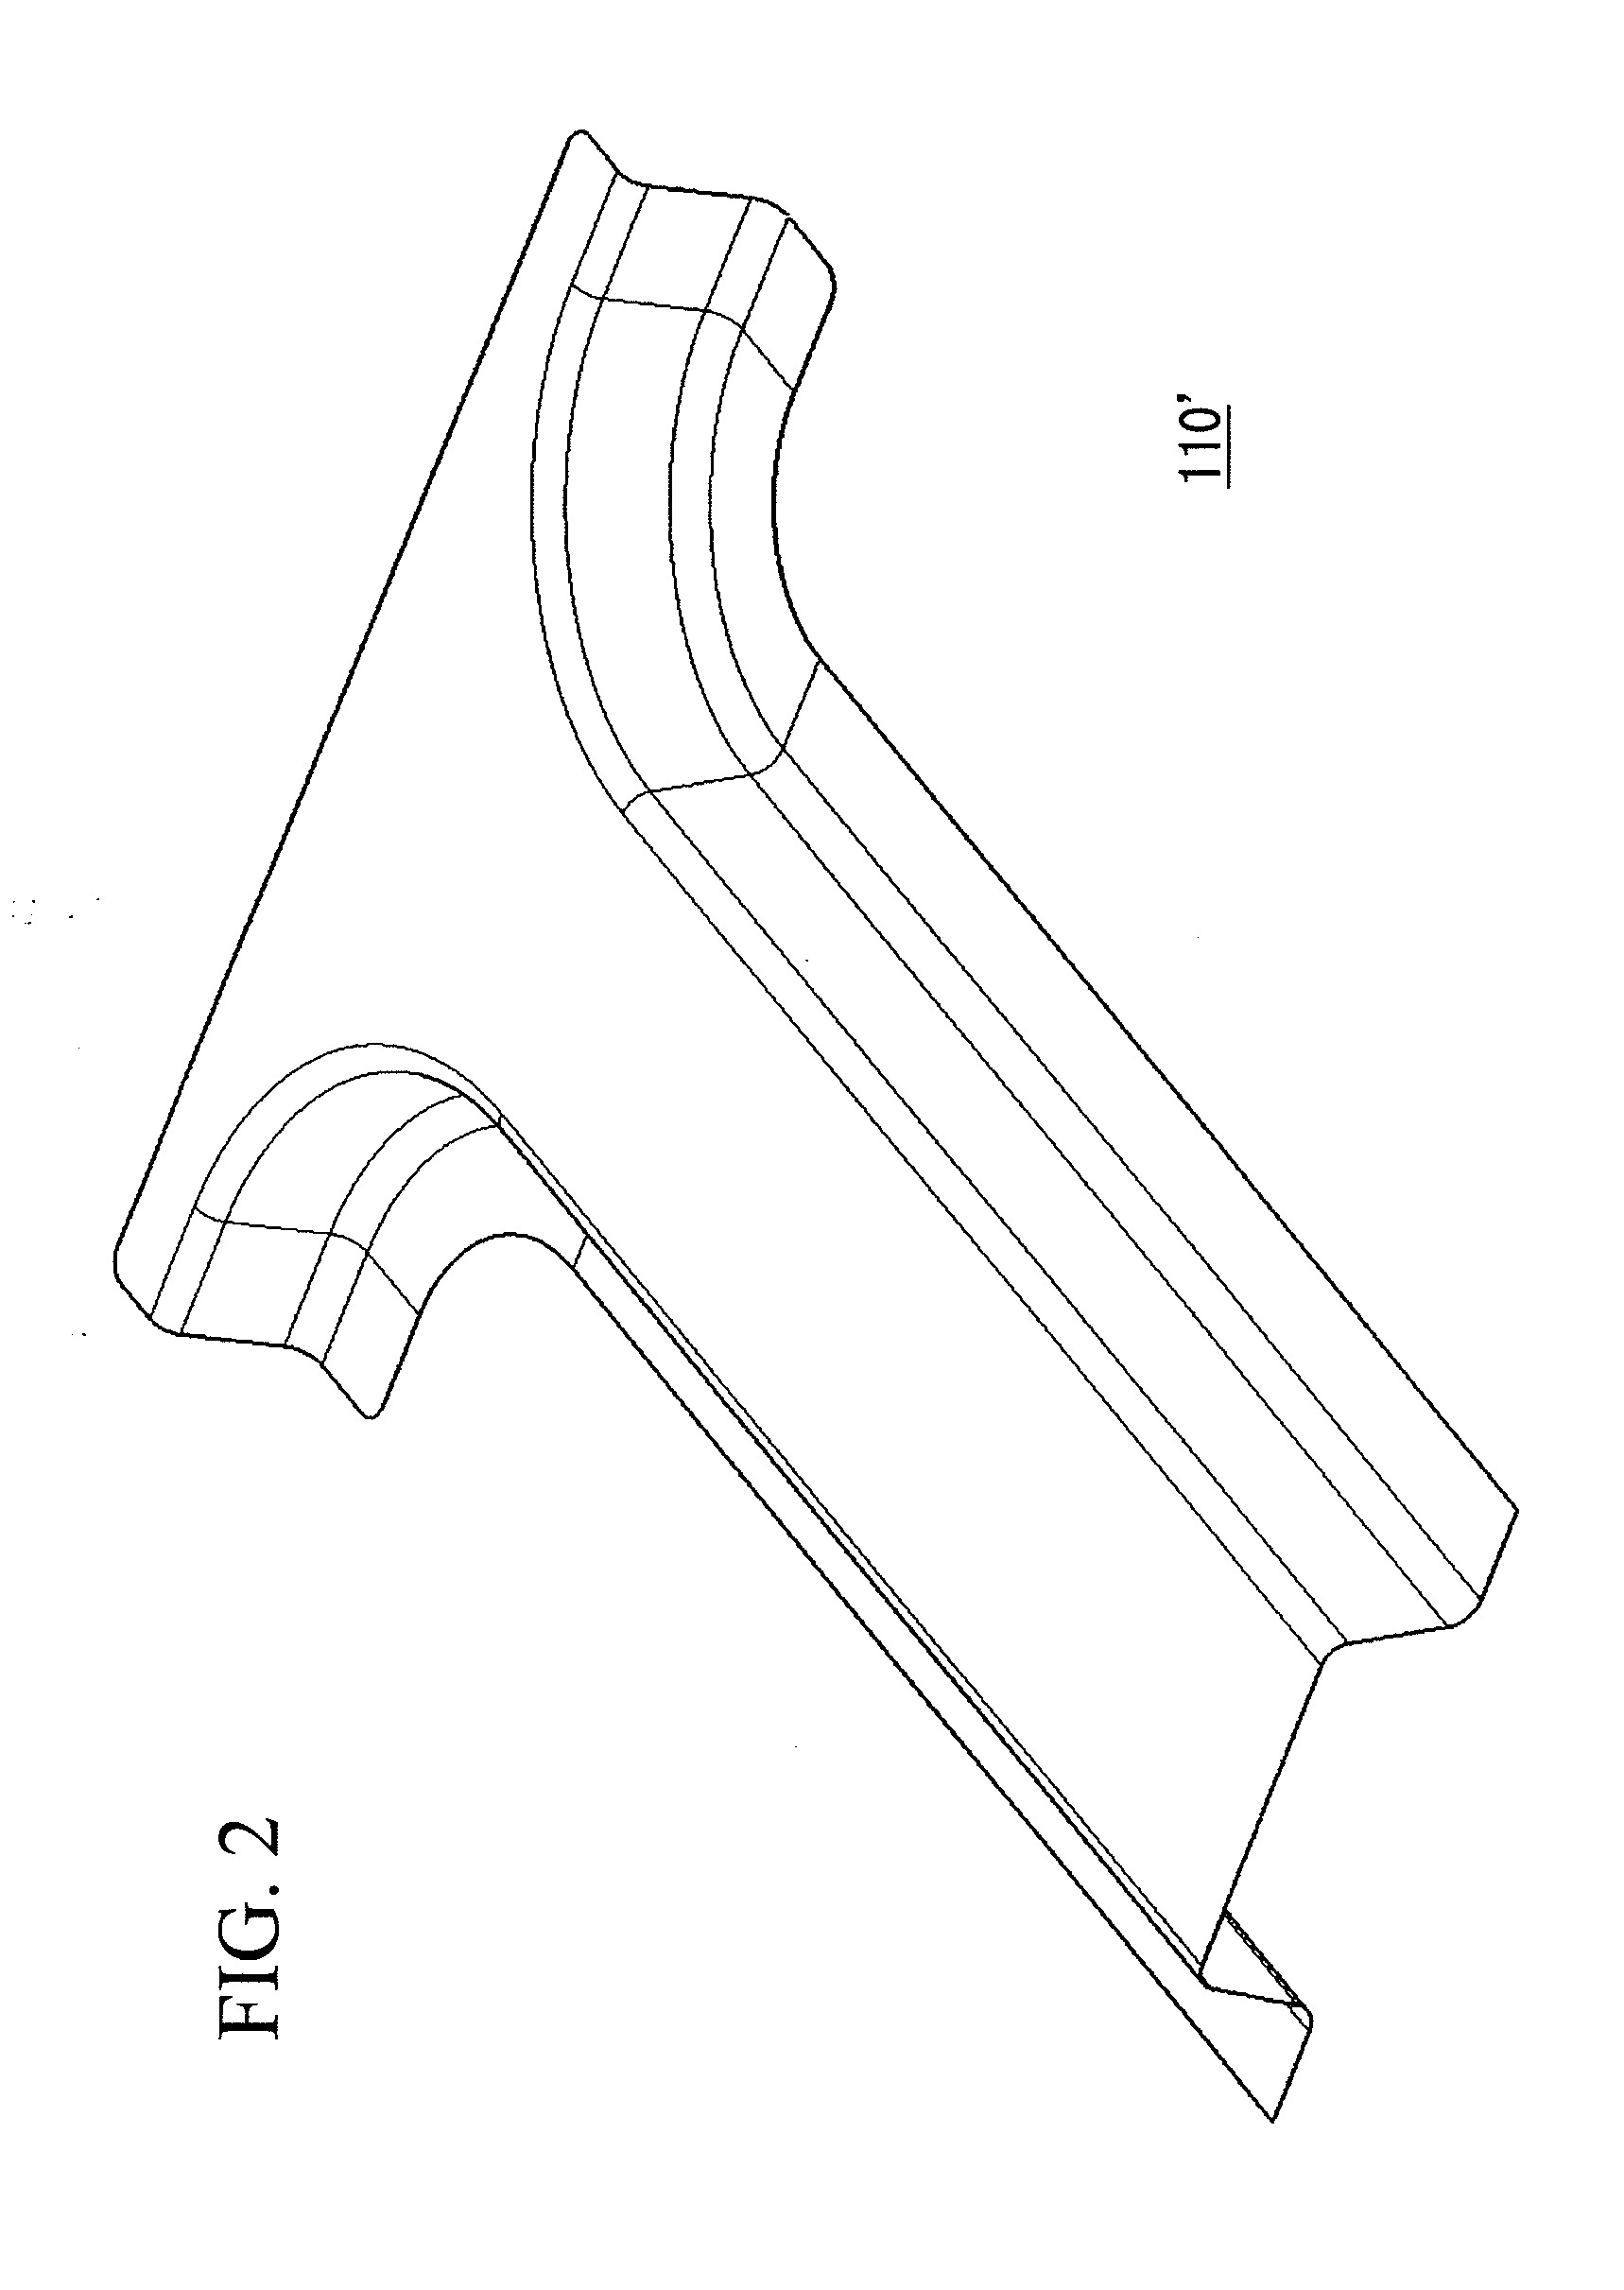 Press-forming method of component with l shape